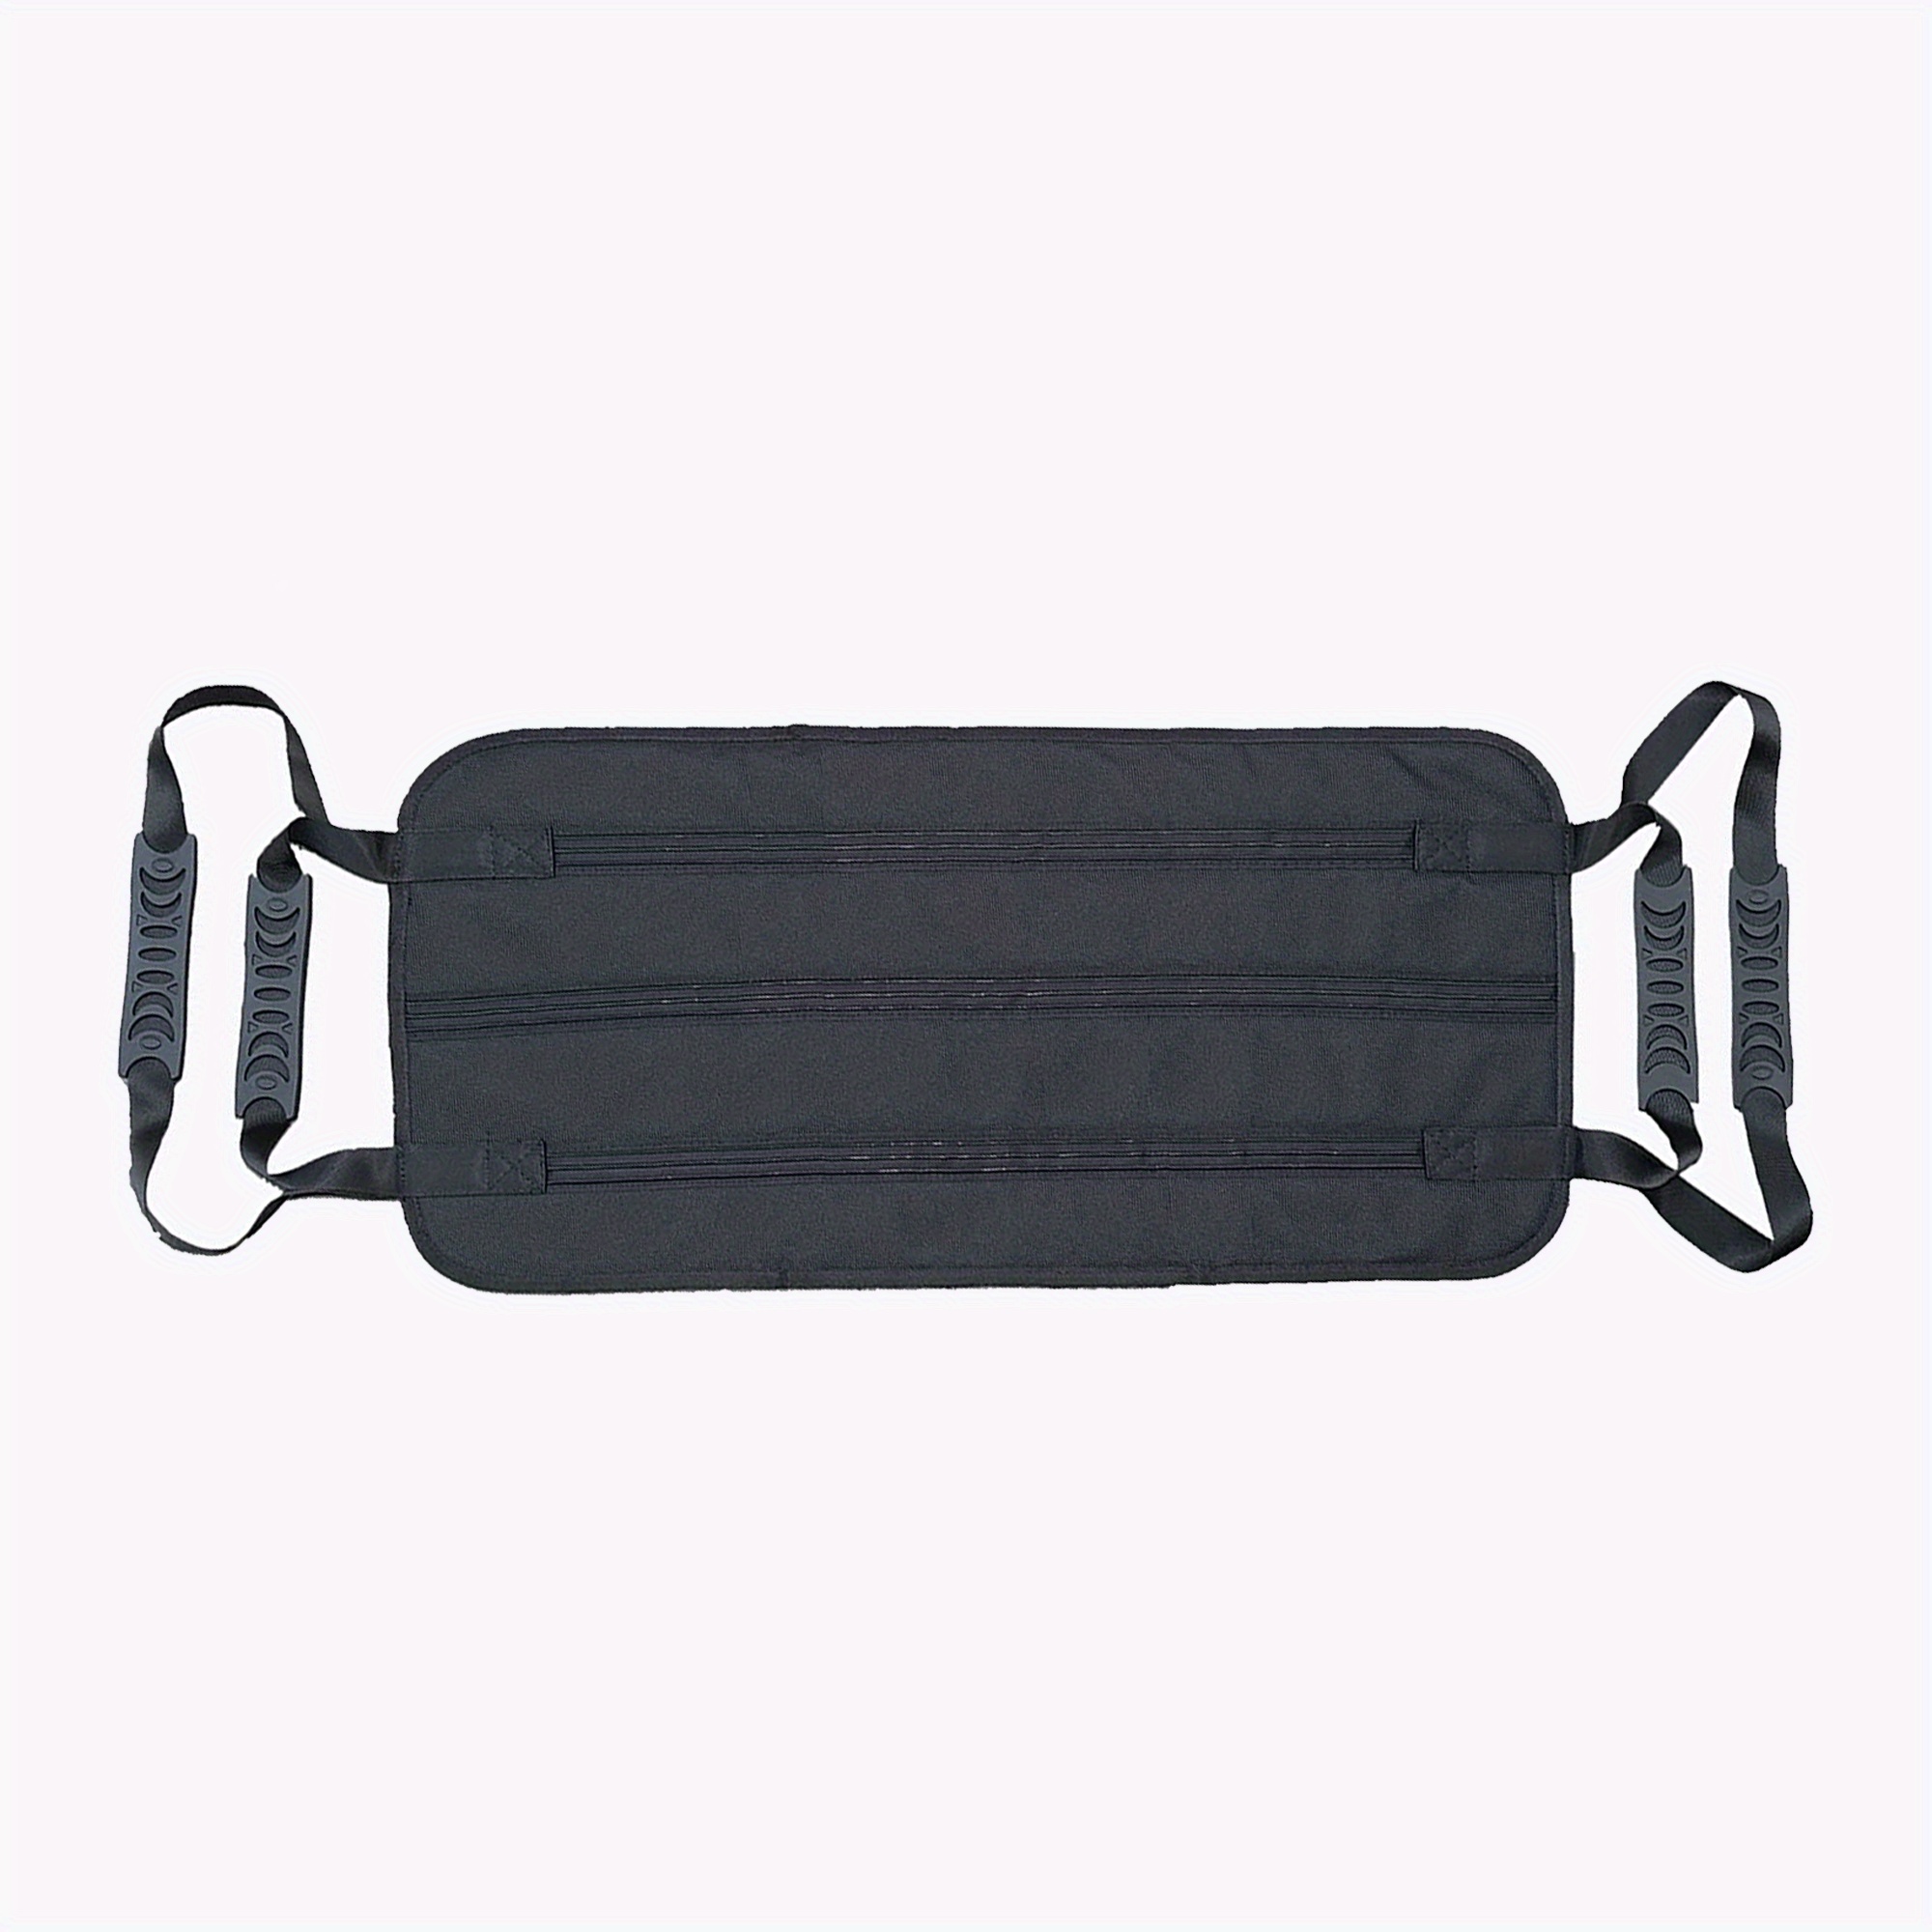 Padded Bed Transfer Nursing Sling for Patient, Elderly Safety Lifting Aids